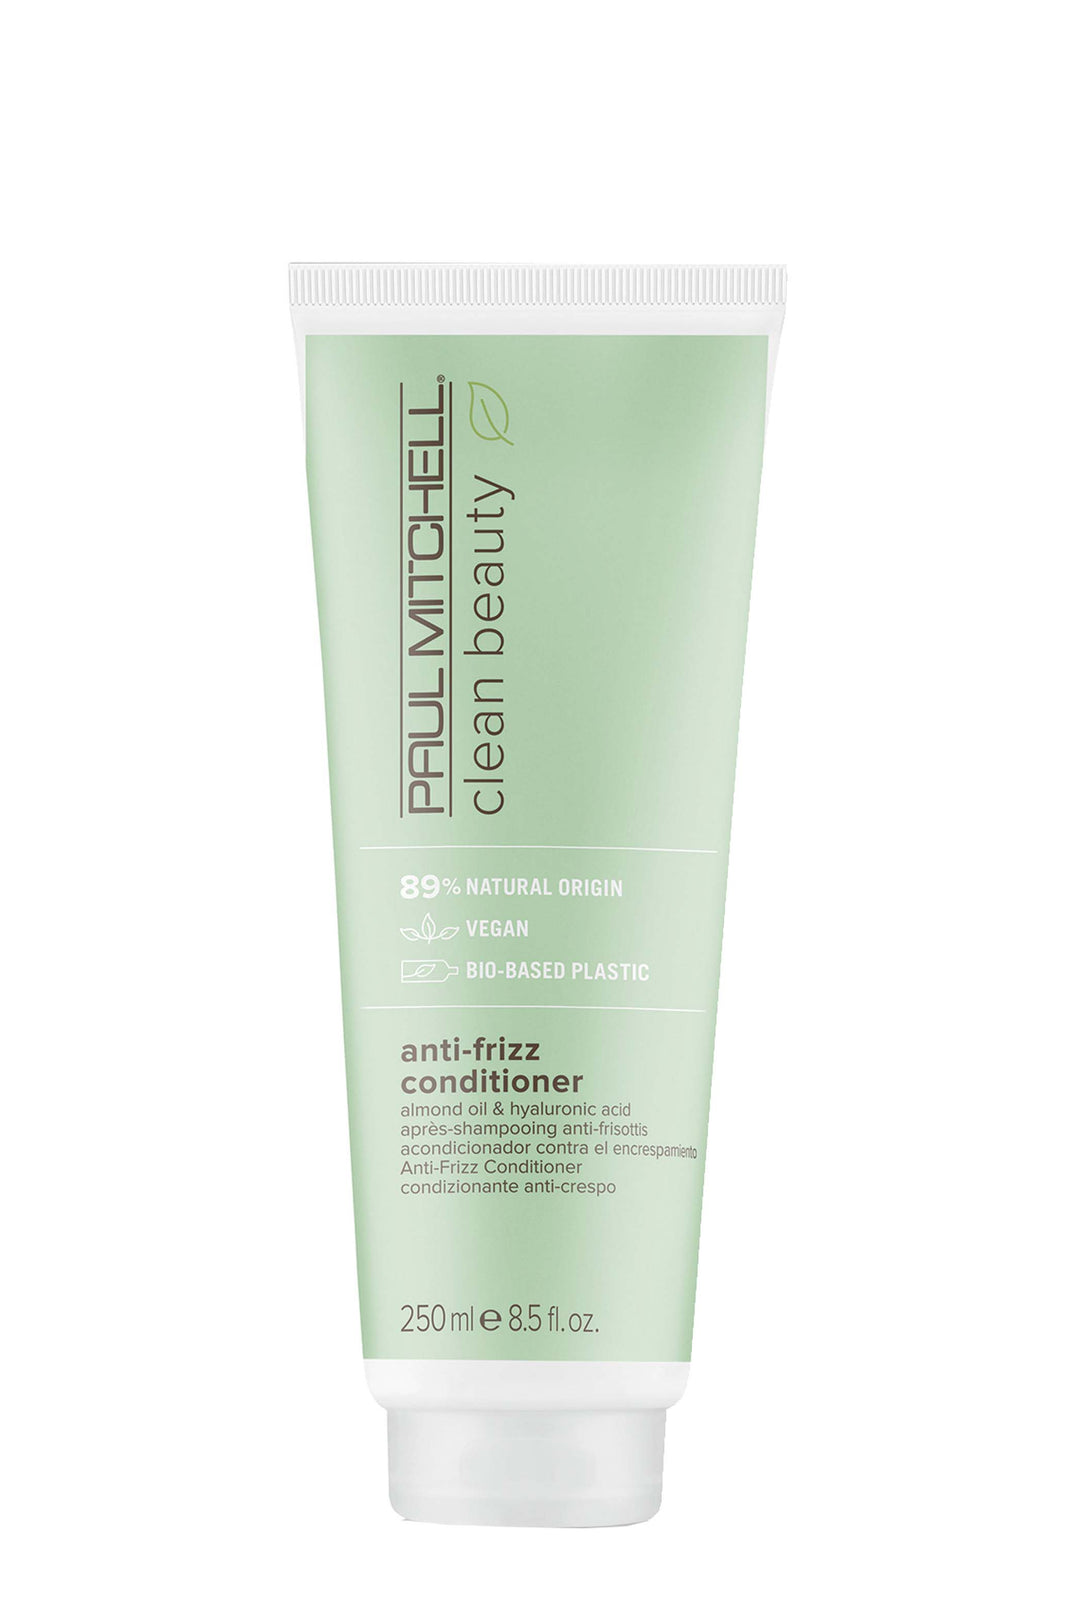 paul-mitchell-clean-beauty-anti-frizz-conditioner-250ml